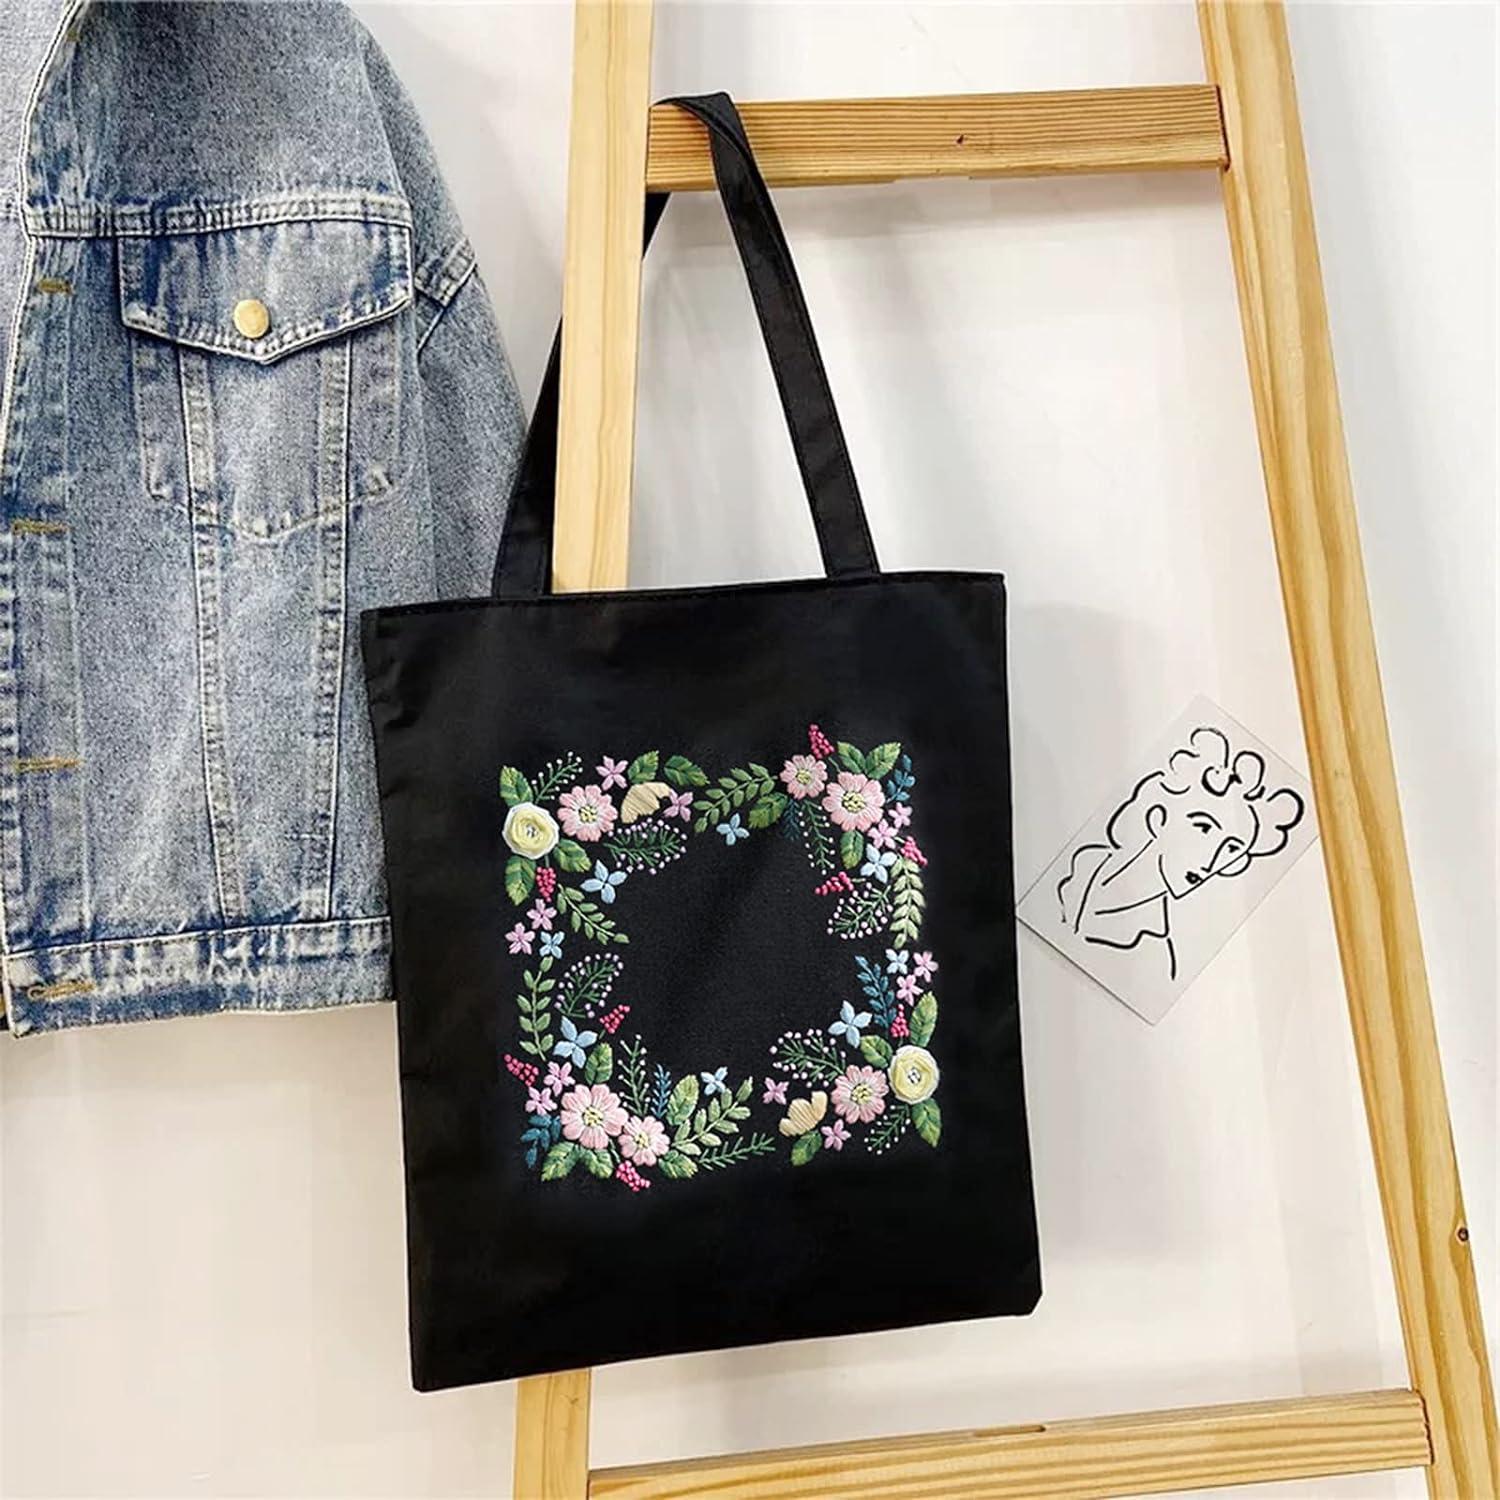 Black Canvas Tote Bag Embroidery Kit,Flowers Art Pattern,Cross Stitch Kits,  Including Stamped Embroidery Bag with Hoops,Needle, Instruction Manual and